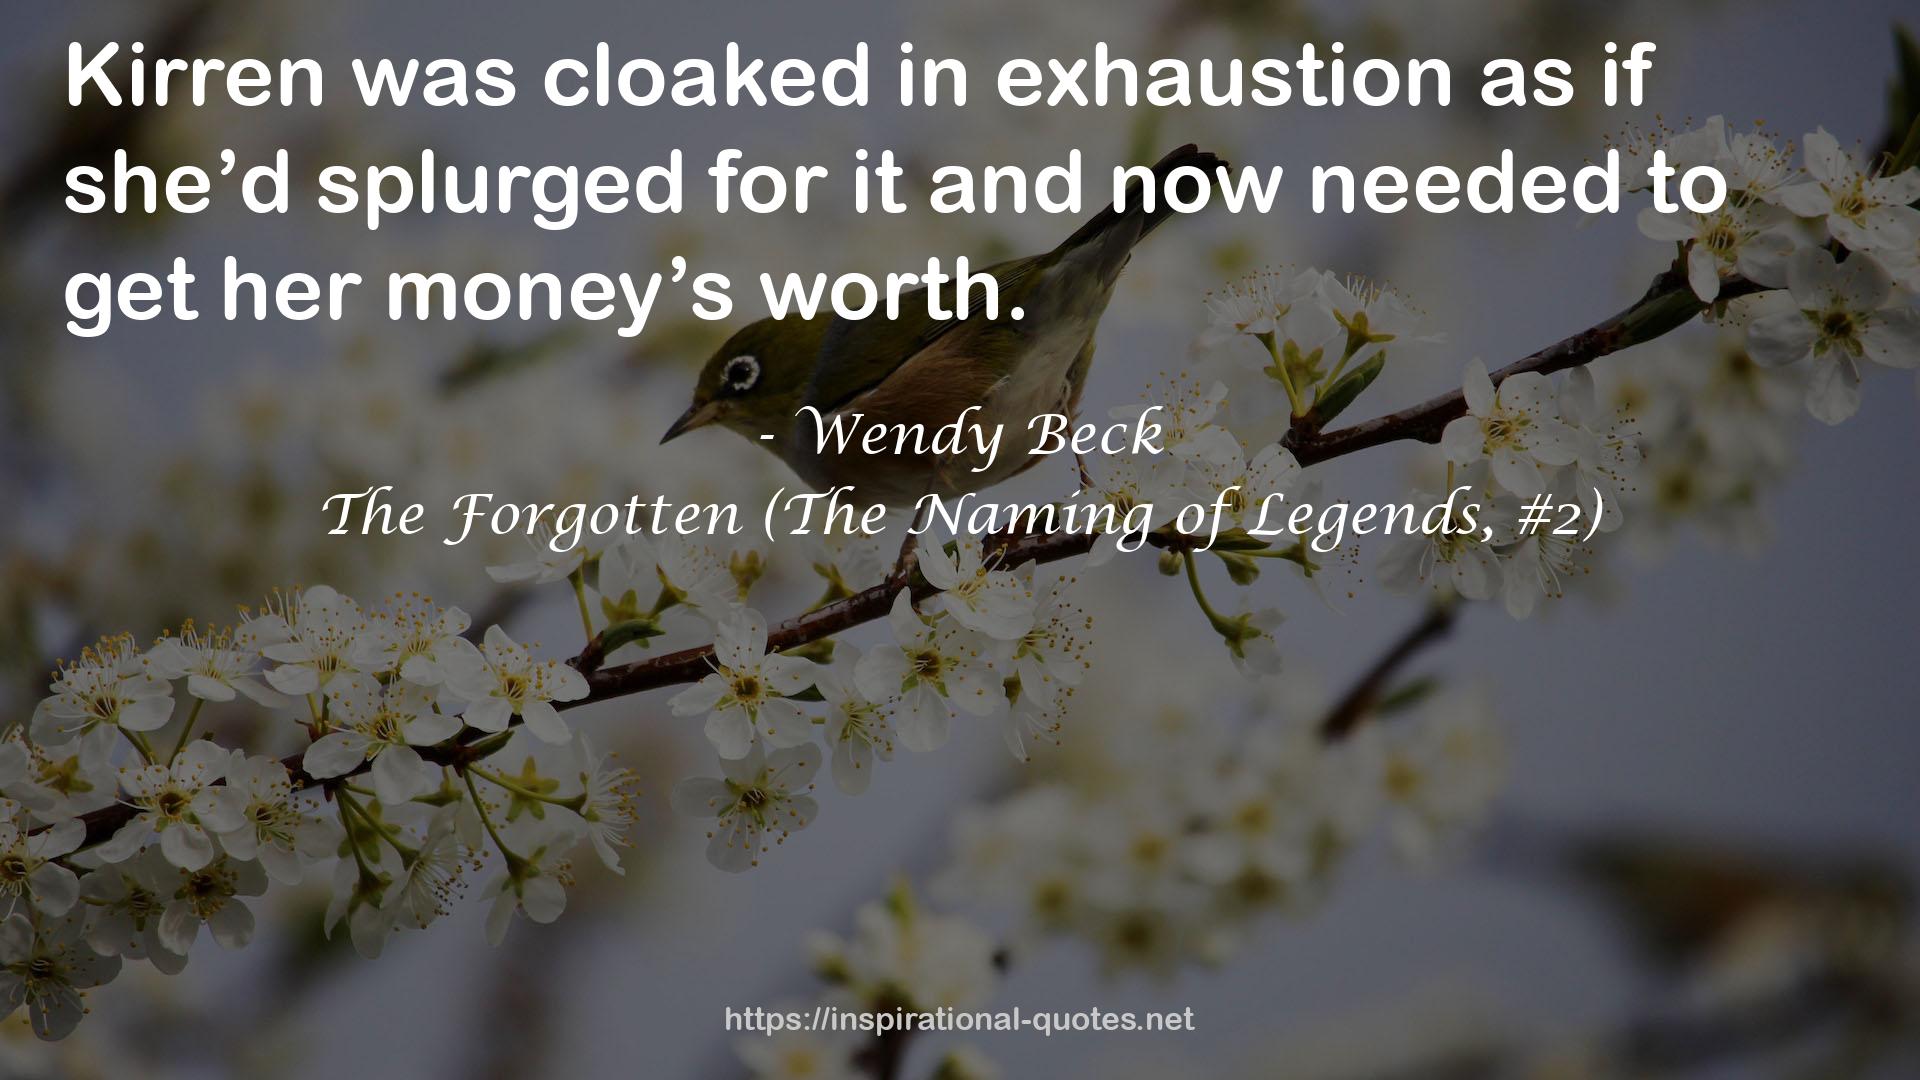 The Forgotten (The Naming of Legends, #2) QUOTES